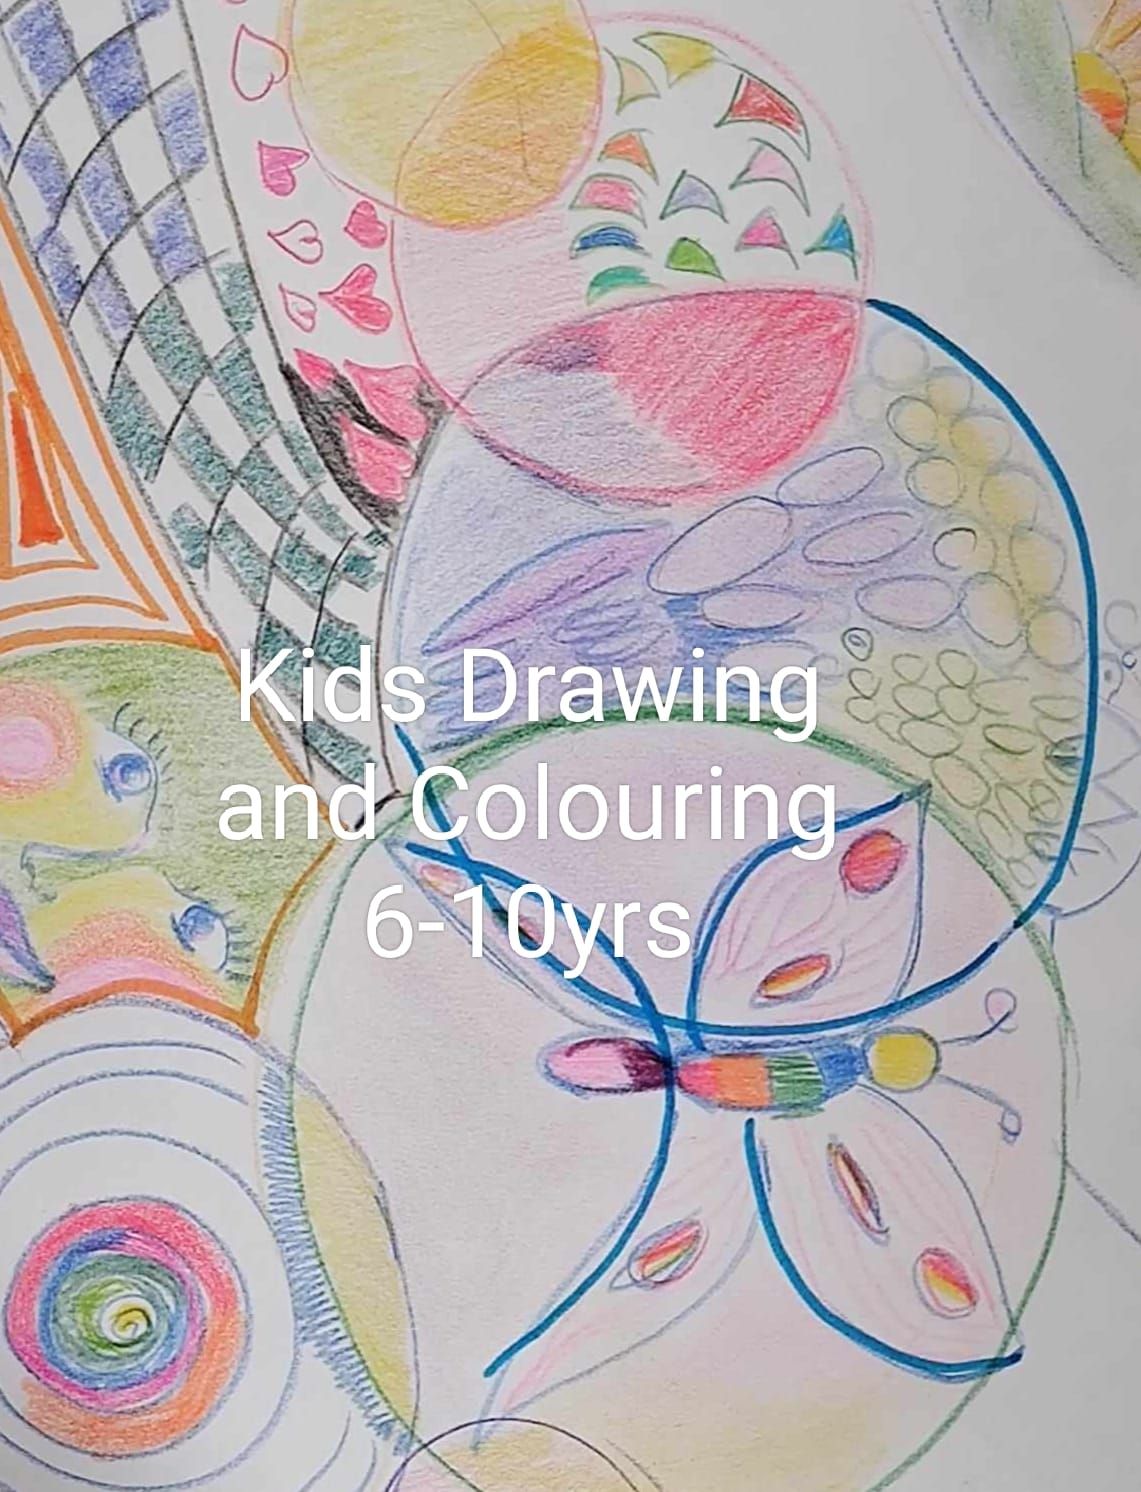 Kids Drawing and Colouring 6-10yrs 